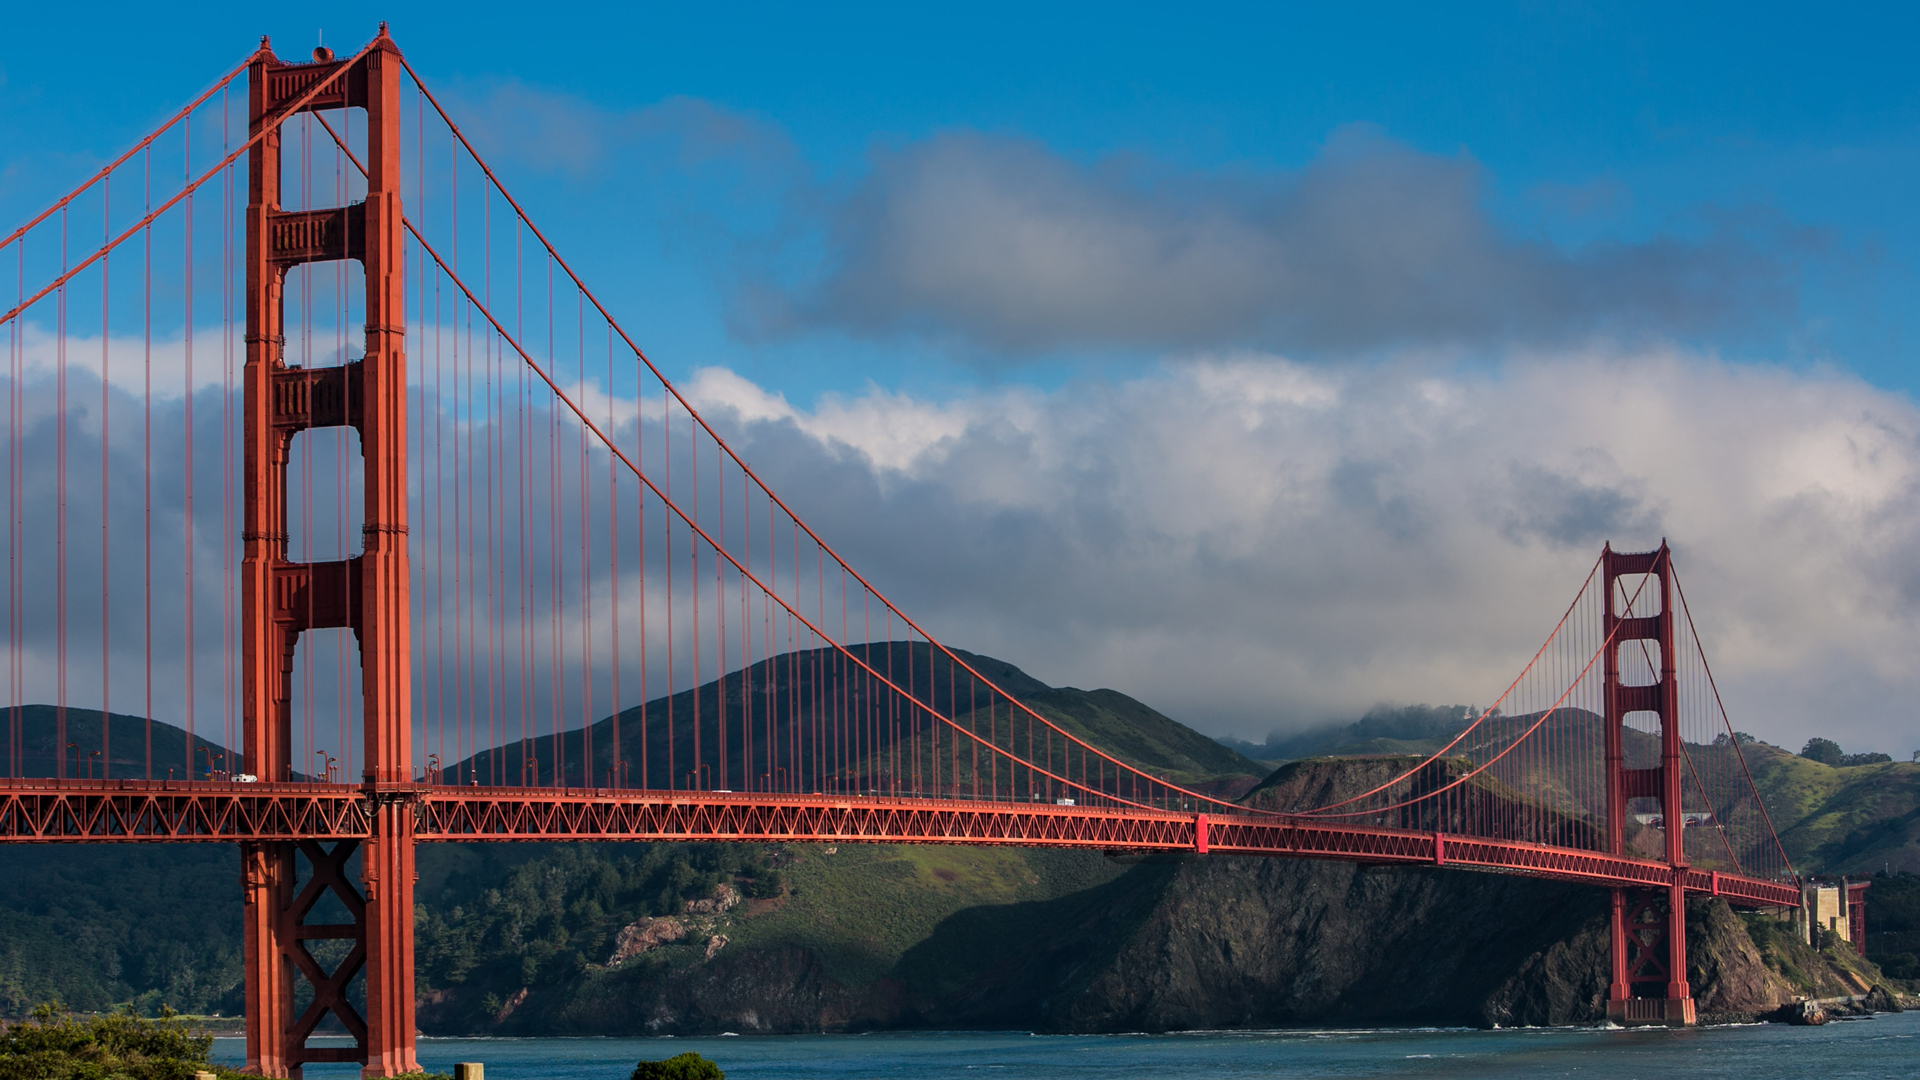 History and Construction of The Golden Gate Bridge in San Francisco